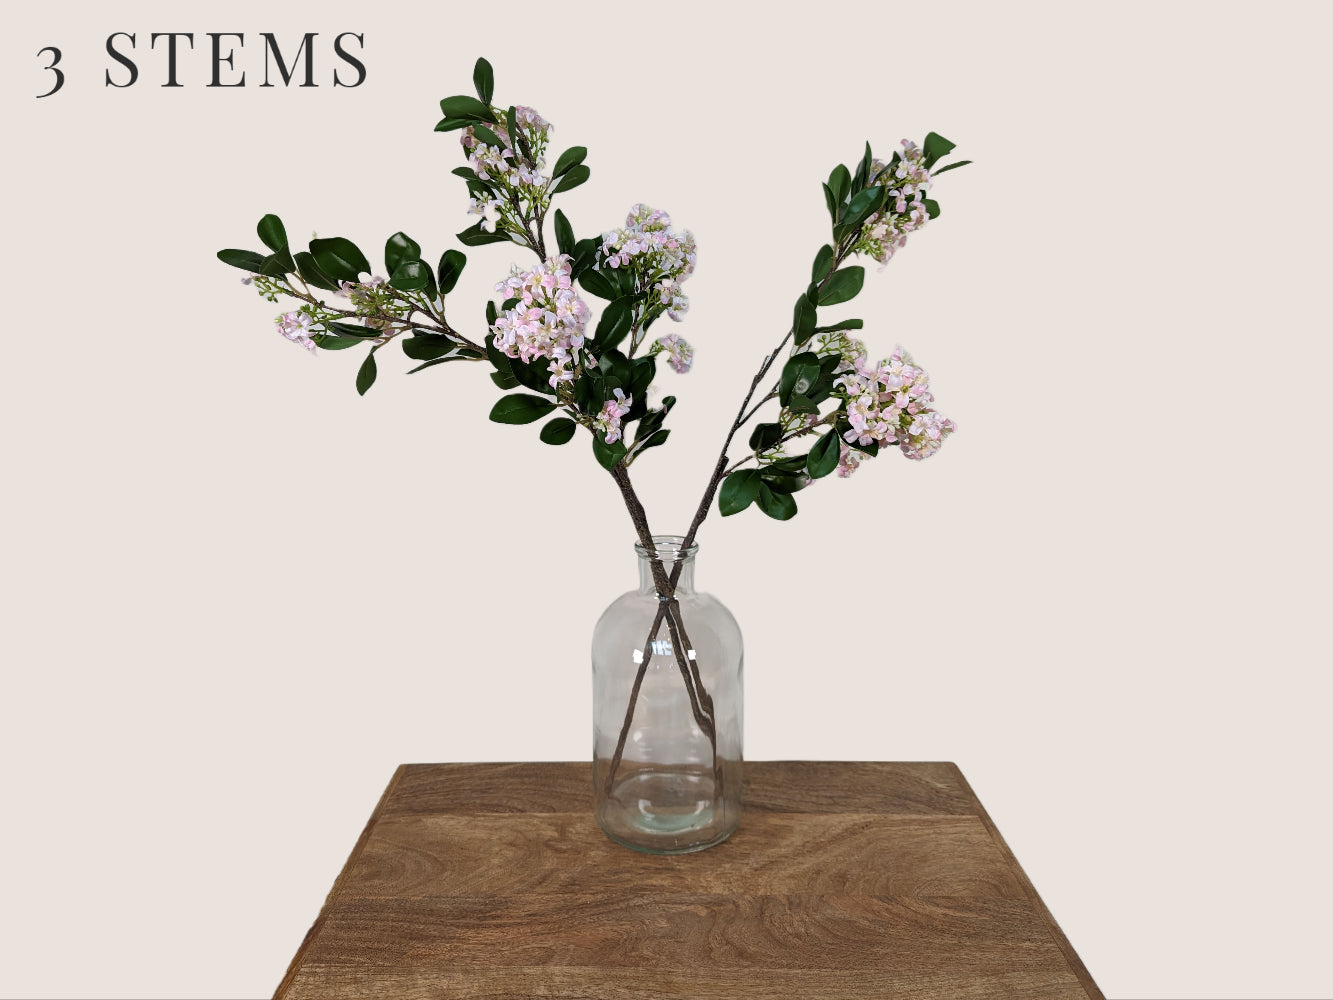 Image of three artificial lilac stems arranged in a clear glass bottleneck vase. The stems are each 30 inches tall and feature lifelike details such as white, pink, and light green petals with a dark brown stem. The buds are light green and the stem has realistic texture and detailing. The arrangement is against a neutral beige background.